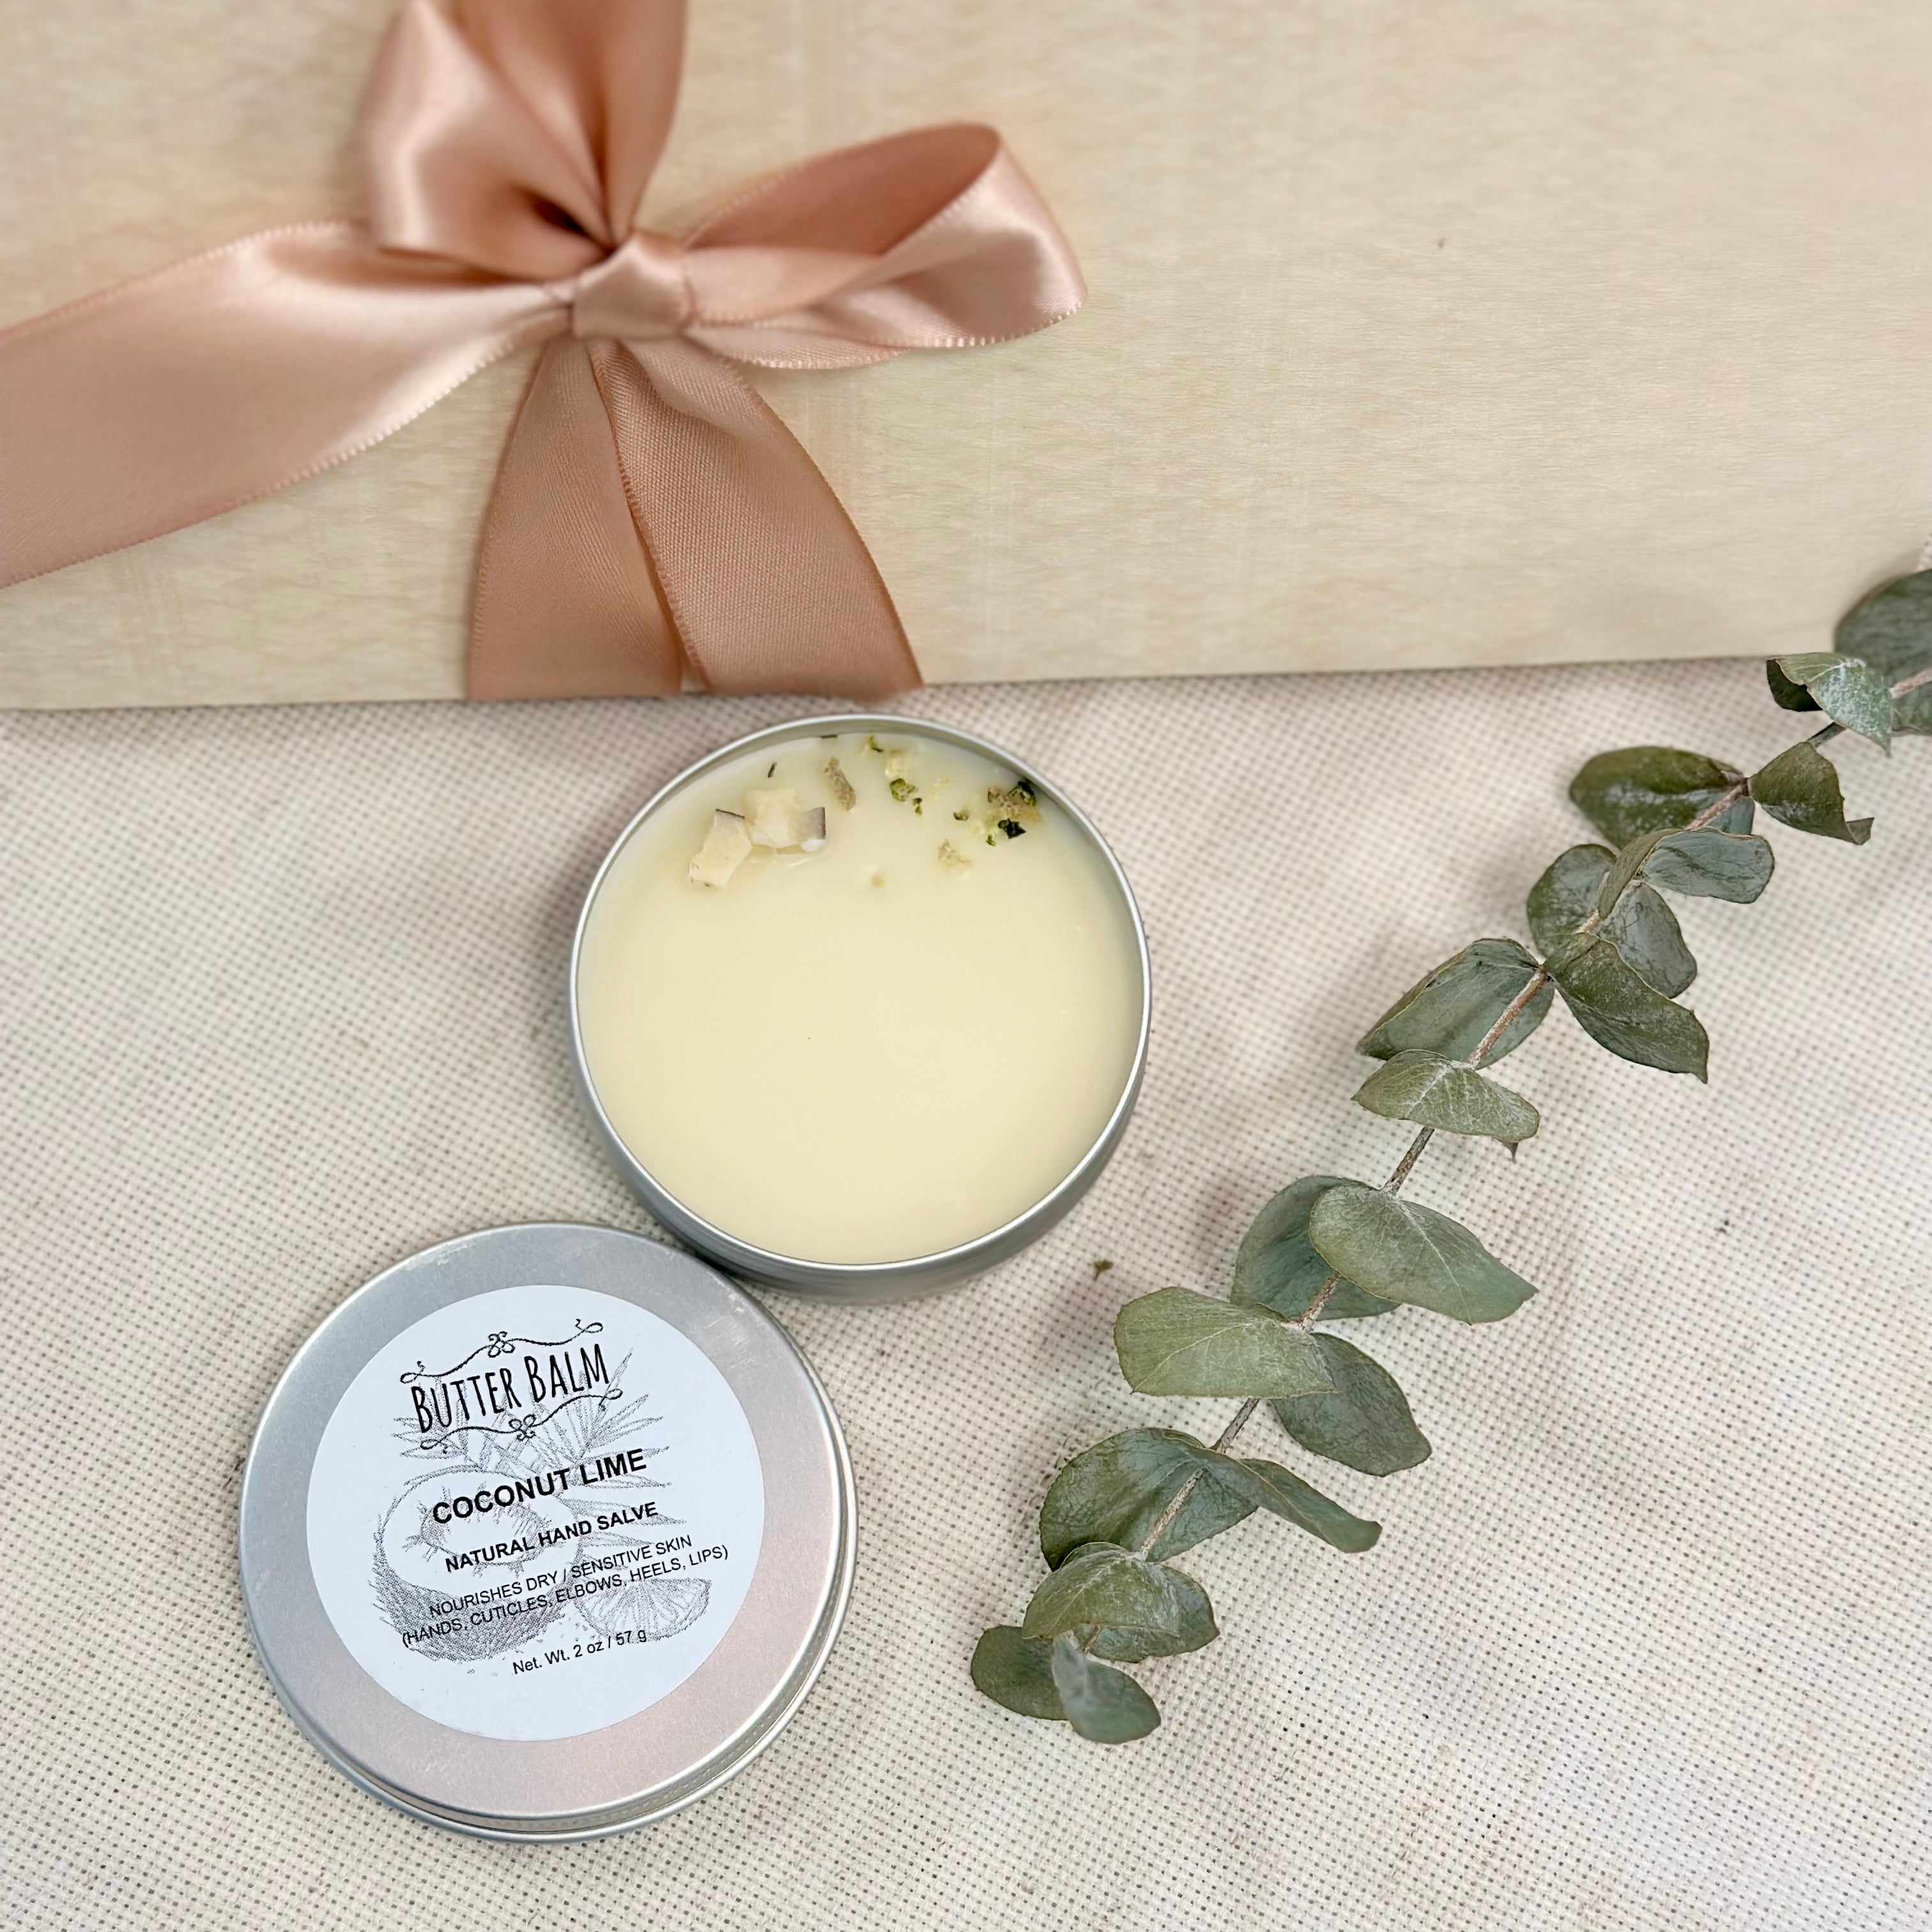 Butter Balm Coconut Lime Hand Cream